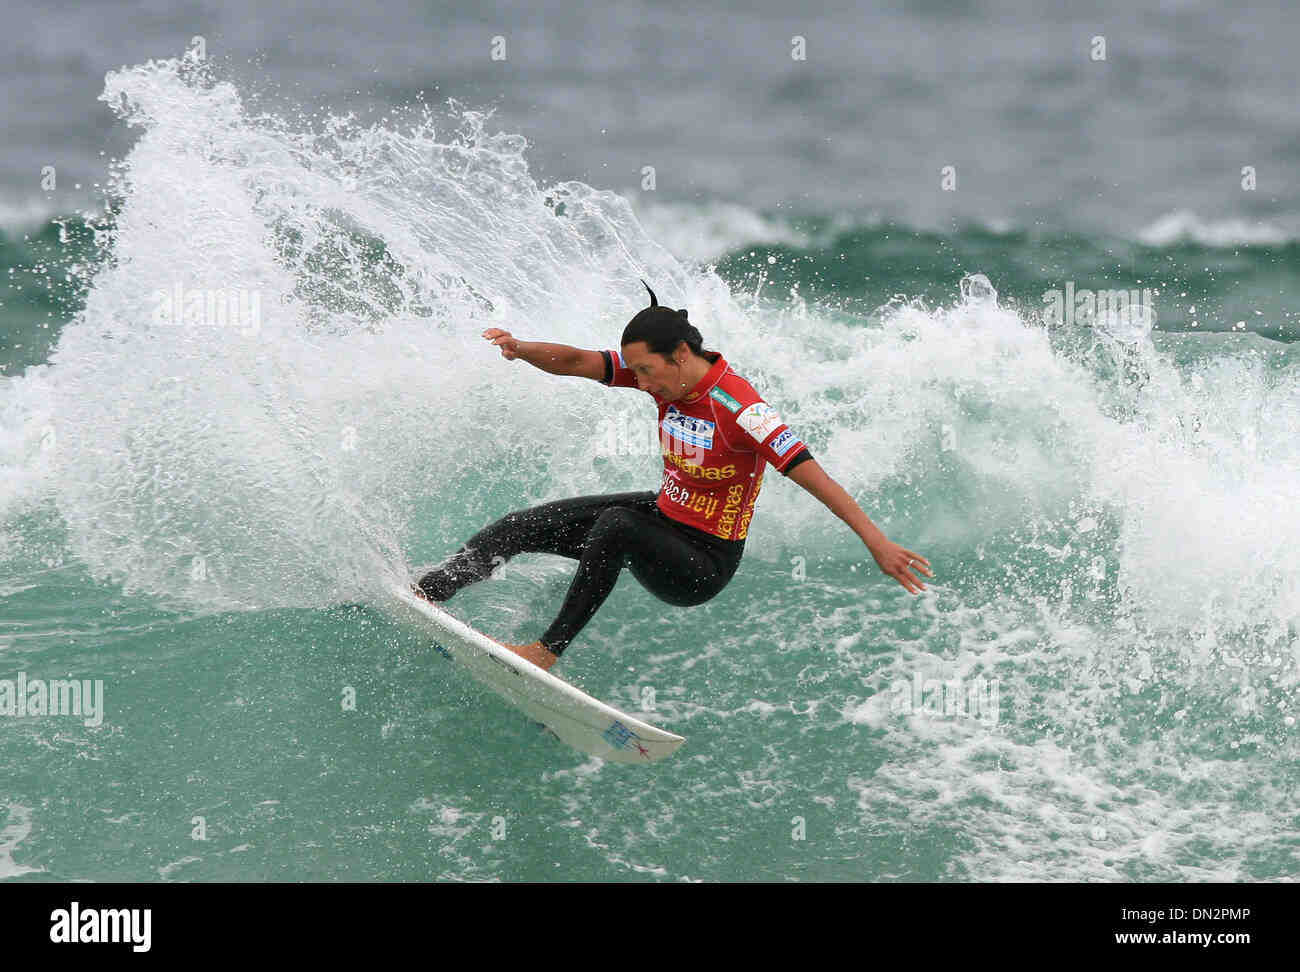 Who is in Australian surfing Hall of Fame?